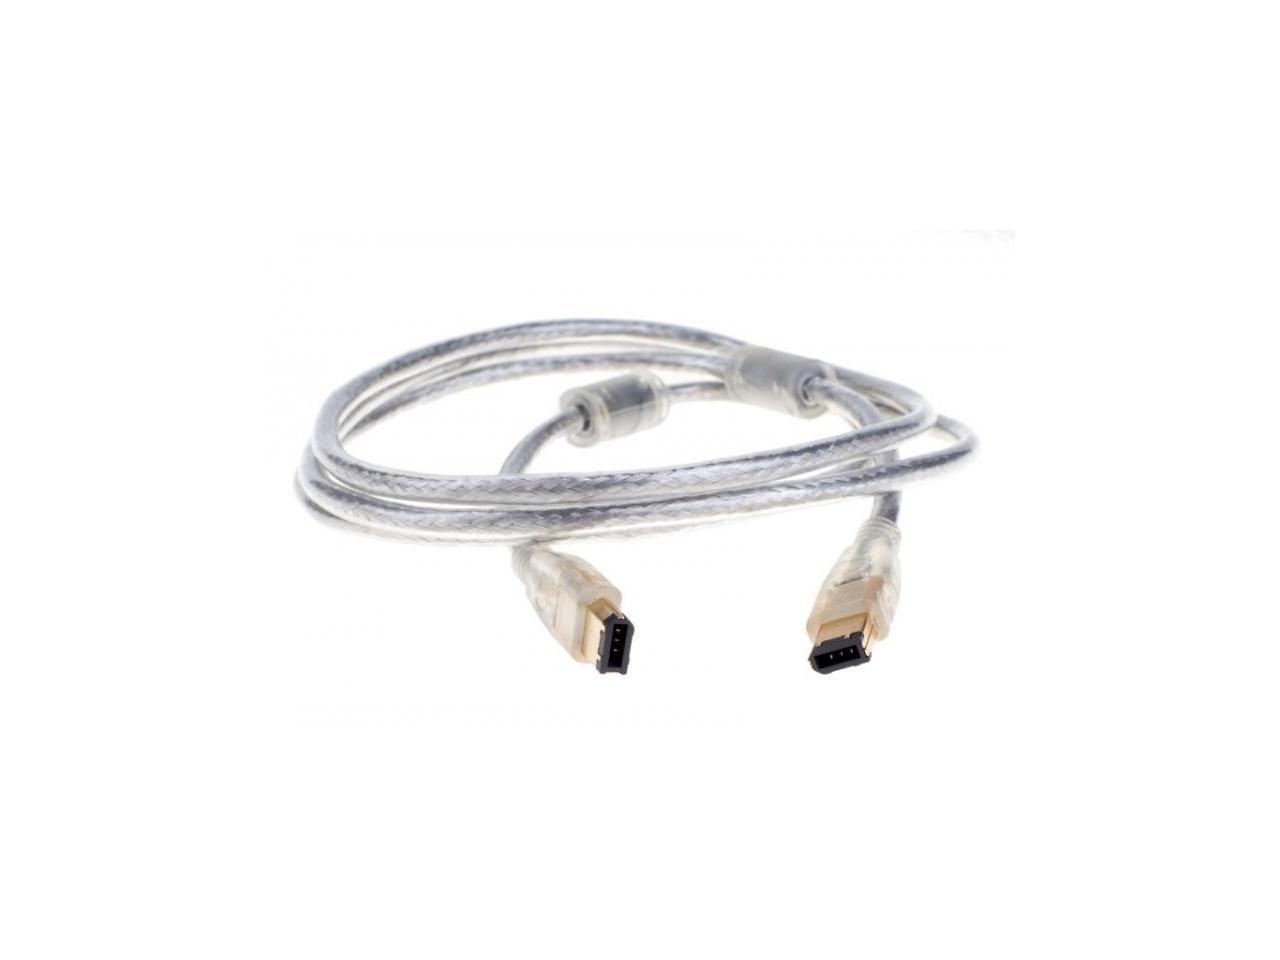 NEON FireWire IEEE 1394 Cable 6-pin male to 6-pin male 6ft High Speed Gold Plated. Model S-PC-1051A